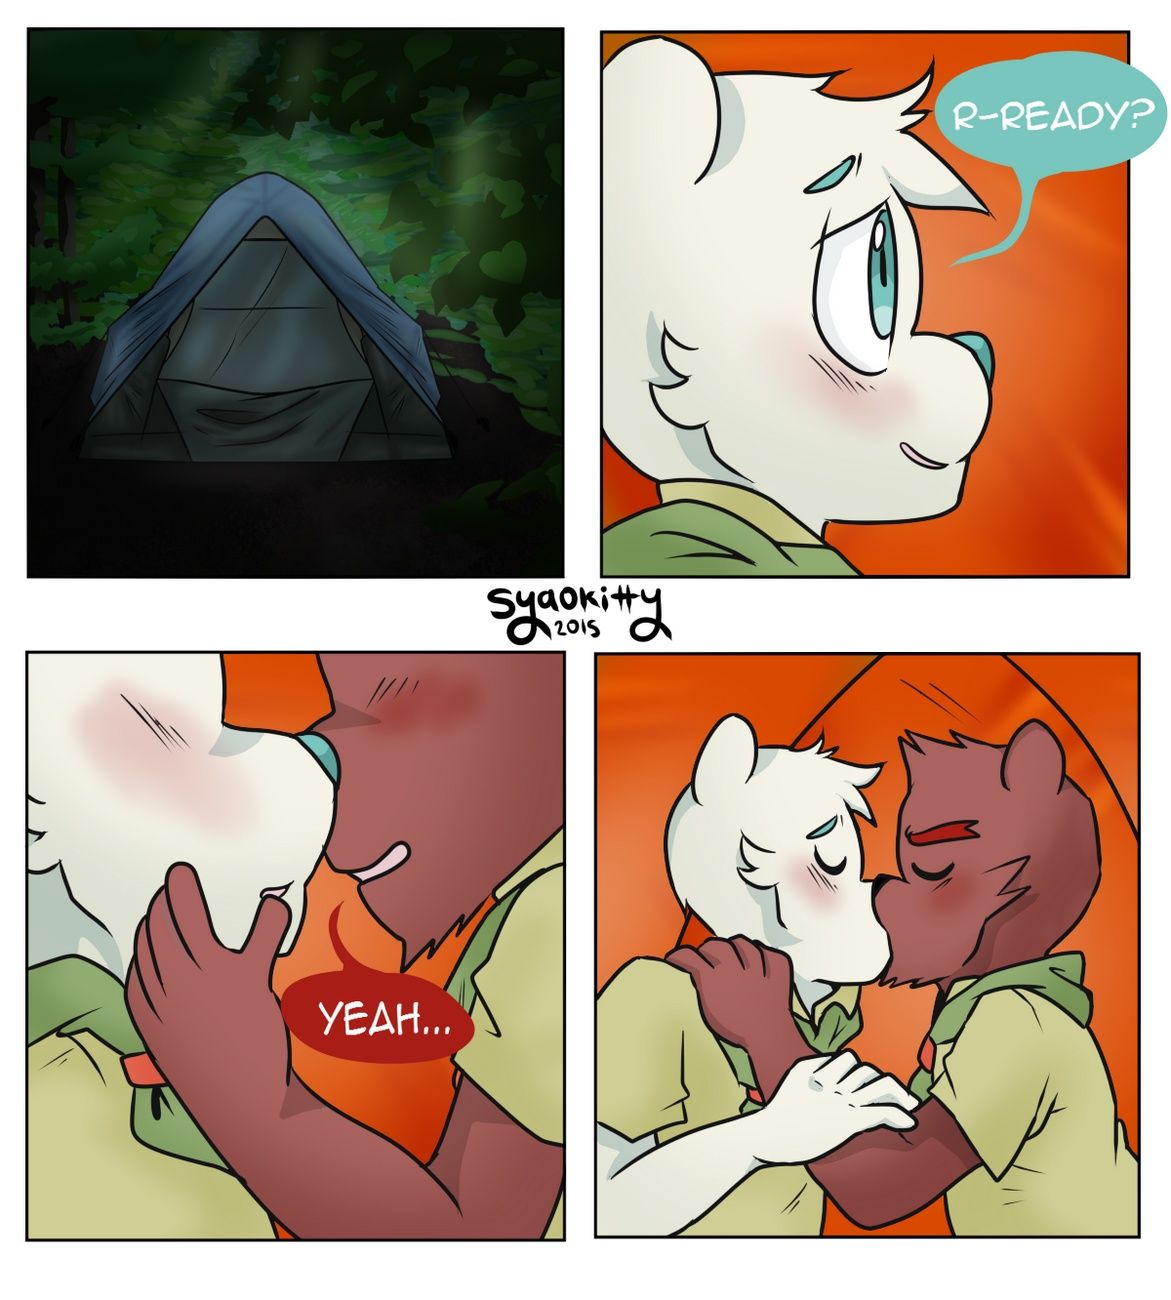 Camp page 2